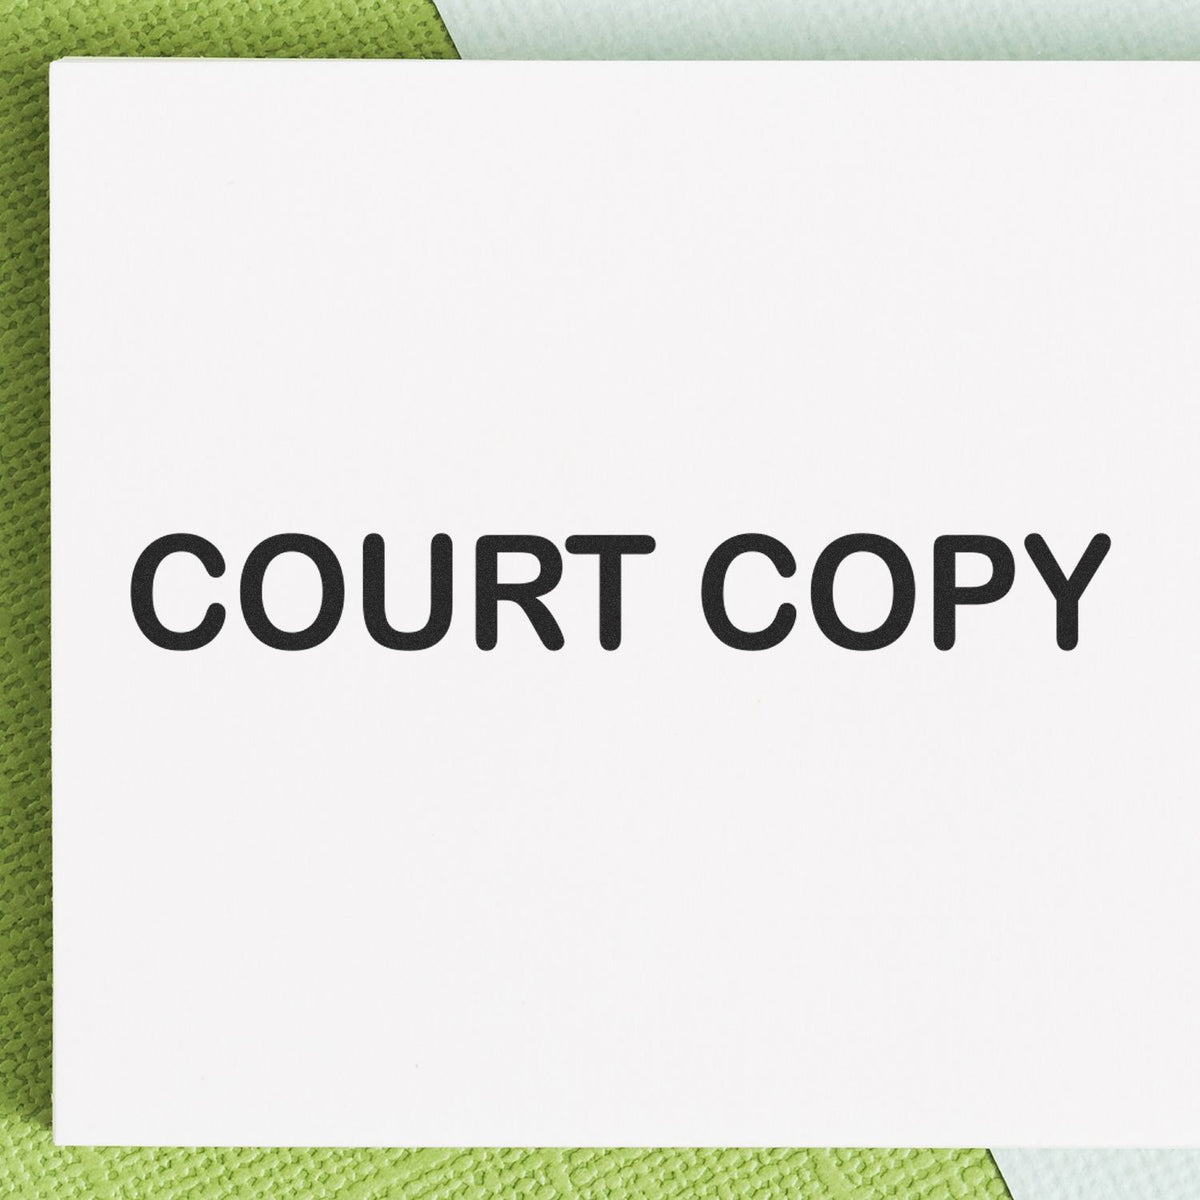 Court Copy Rubber Stamp Lifestyle Photo